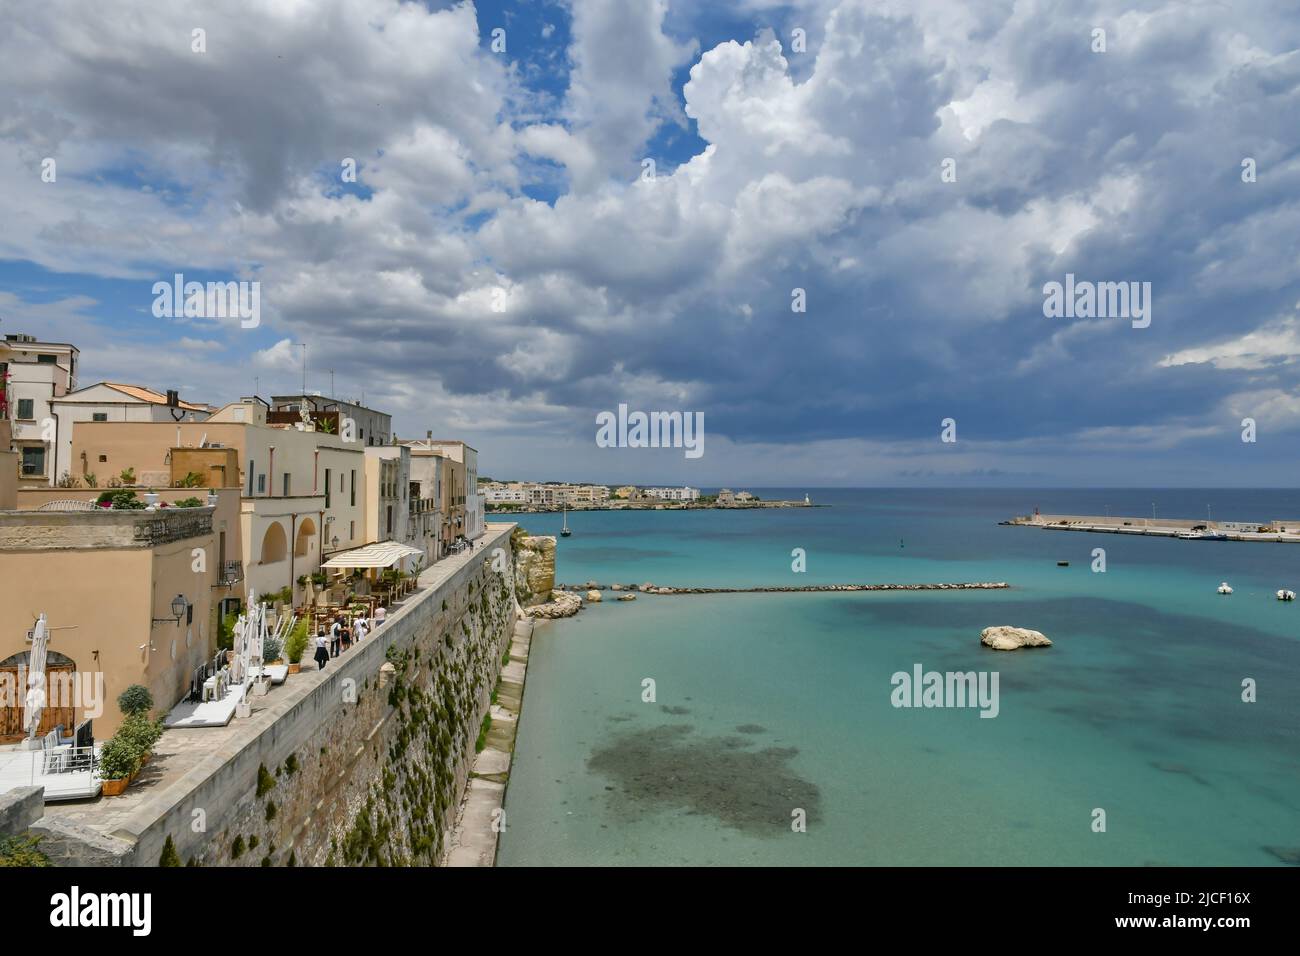 Panoramic view of the town of Otranto, in the Puglia region of Italy. Stock Photo